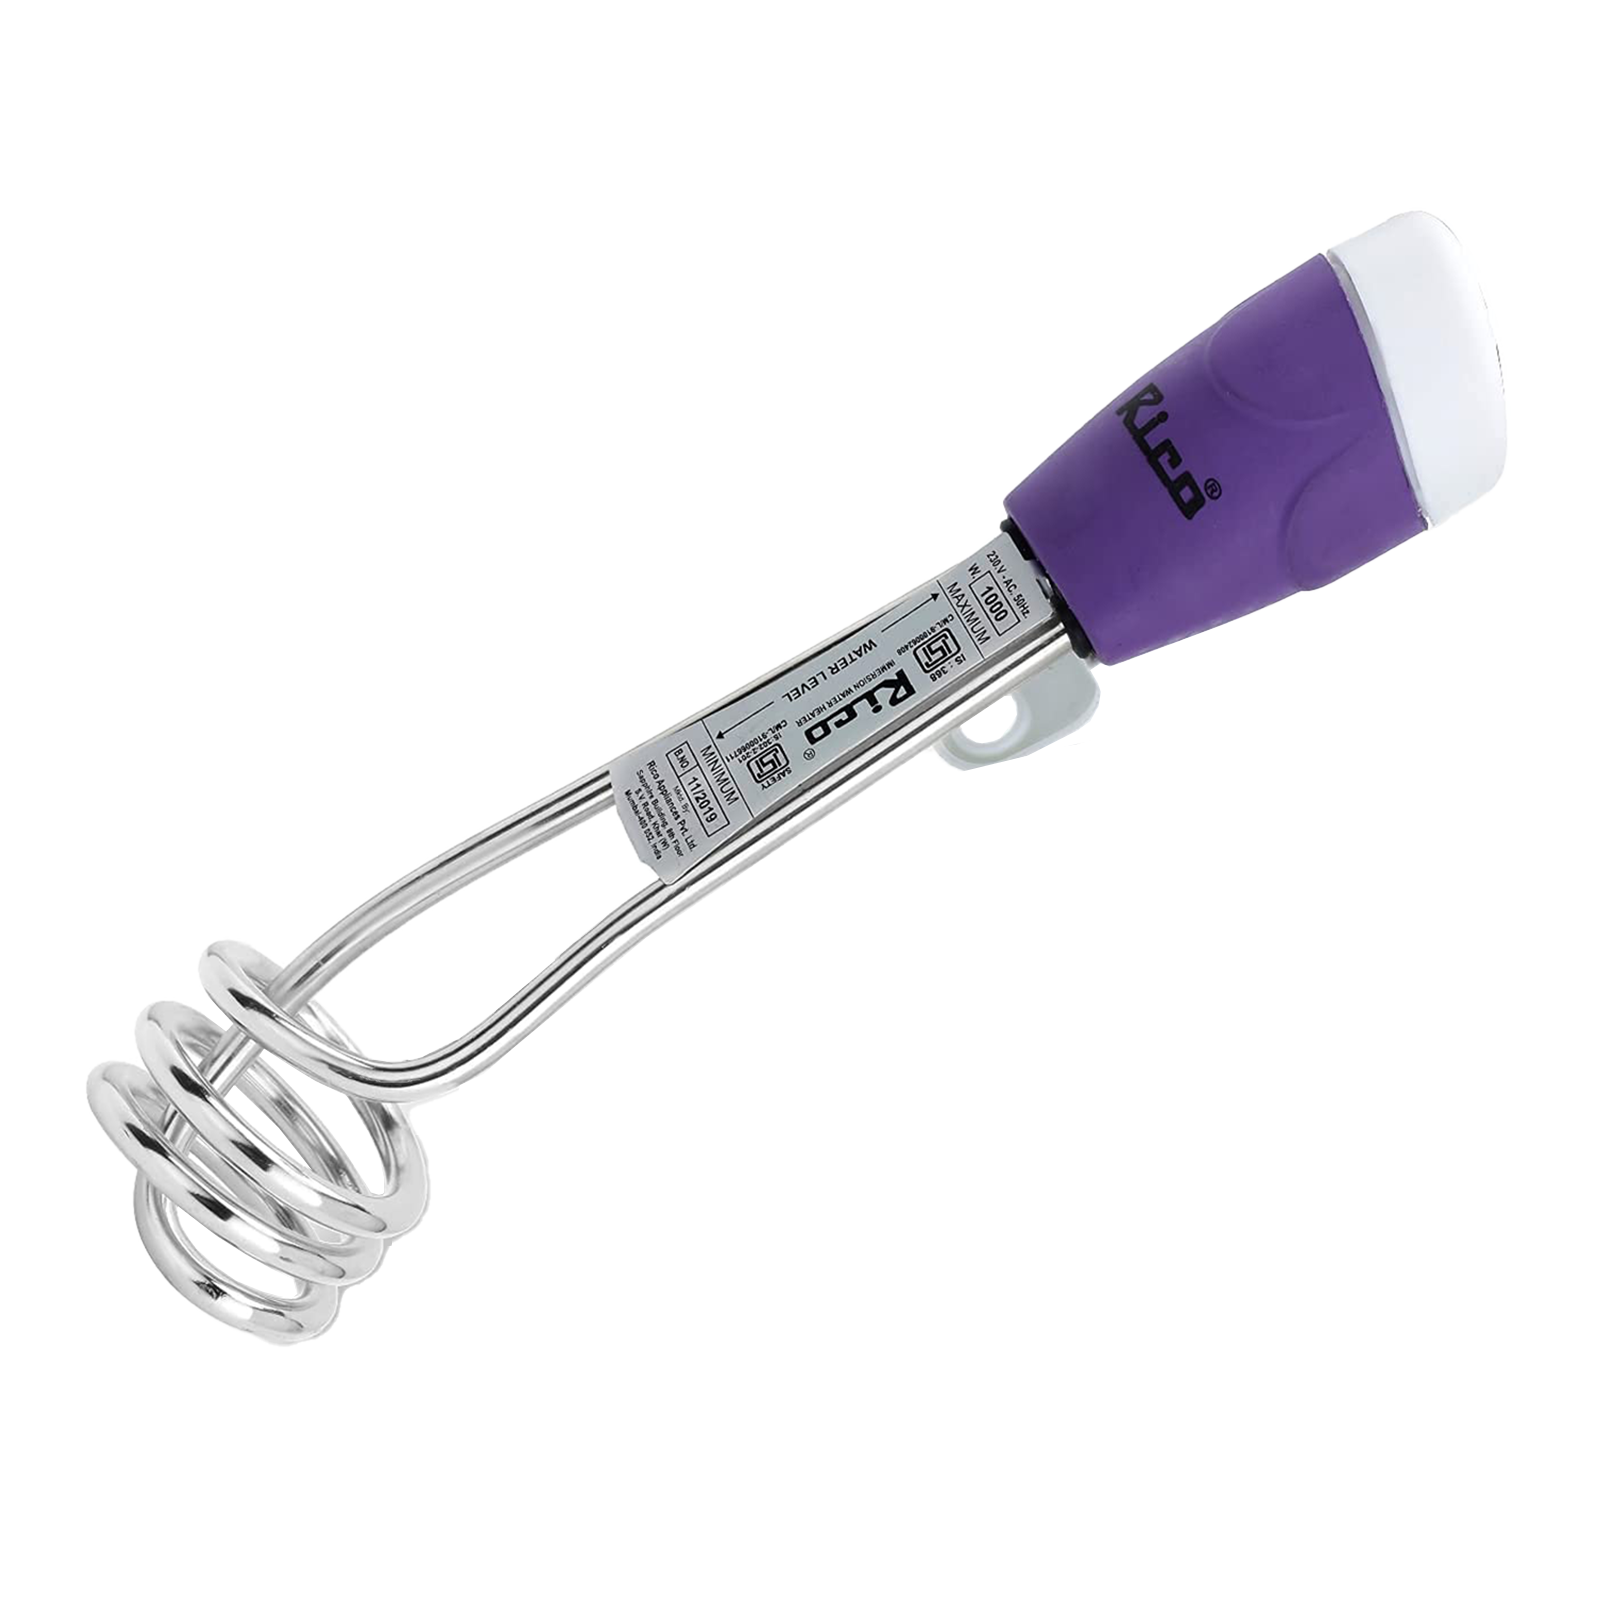 Rico - Rico Shock Proof Water Proof Immersion Rod (1000 Watts, Rico IR1410, Silver)